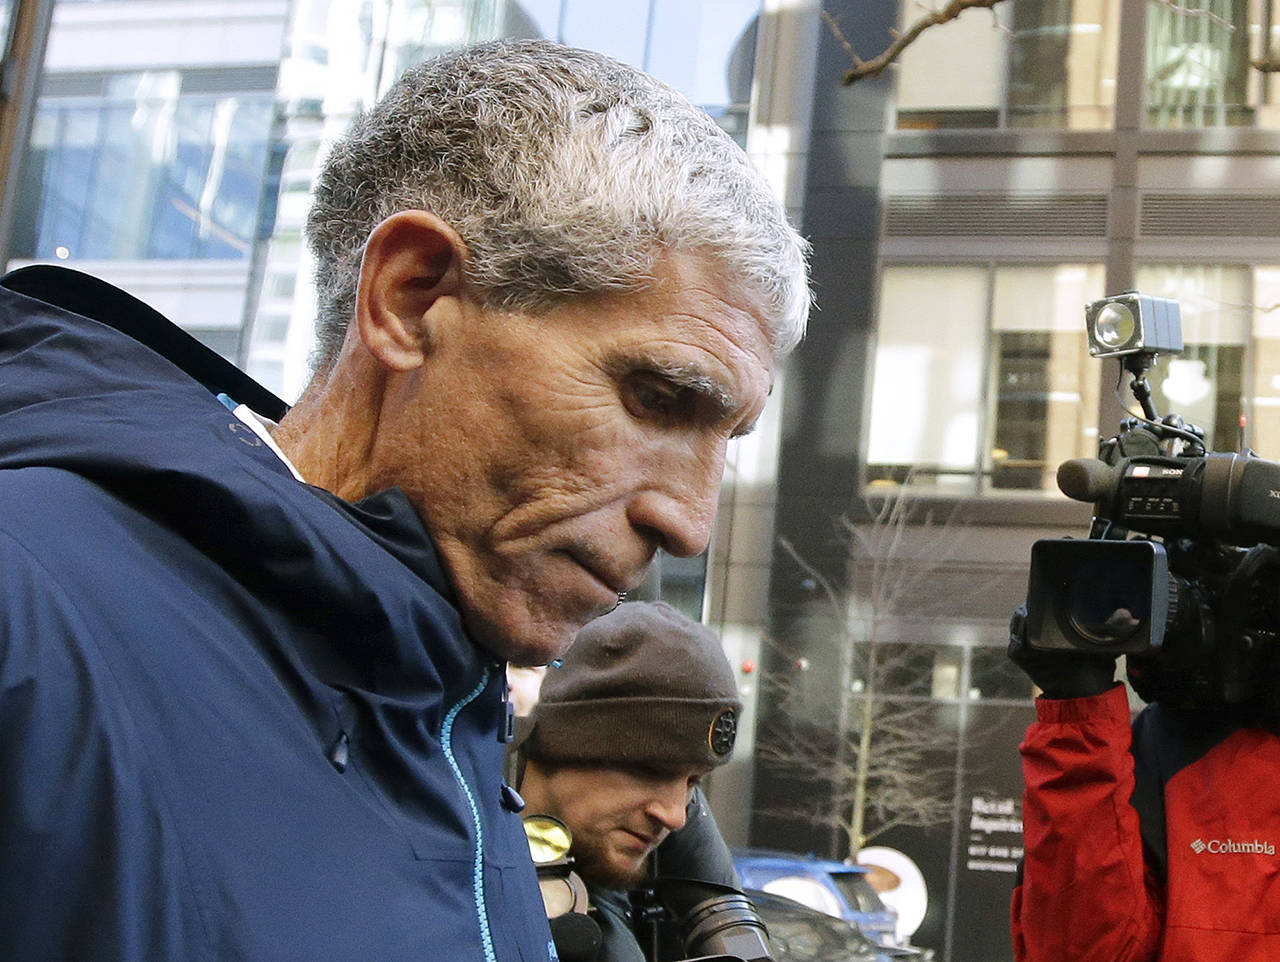 William “Rick” Singer, founder of the Edge College & Career Network, departs federal court in Boston on Tuesday, after he pleaded guilty to charges in a nationwide college admissions bribery scandal. (AP Photo/Steven Senne)